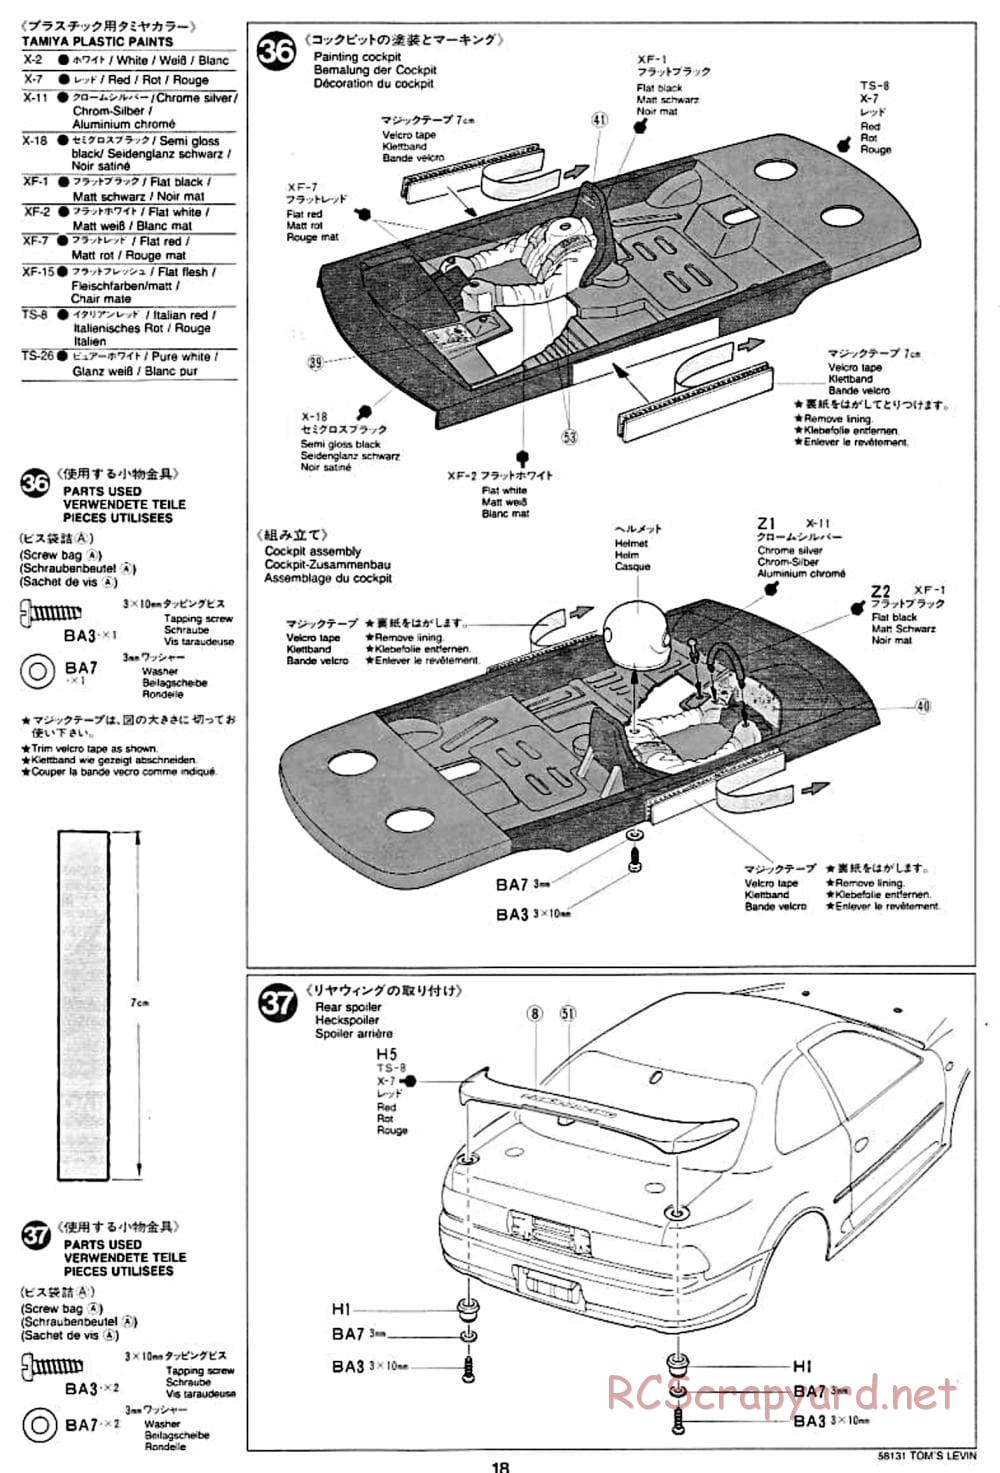 Tamiya - Toyota Tom's Levin - FF-01 Chassis - Manual - Page 18